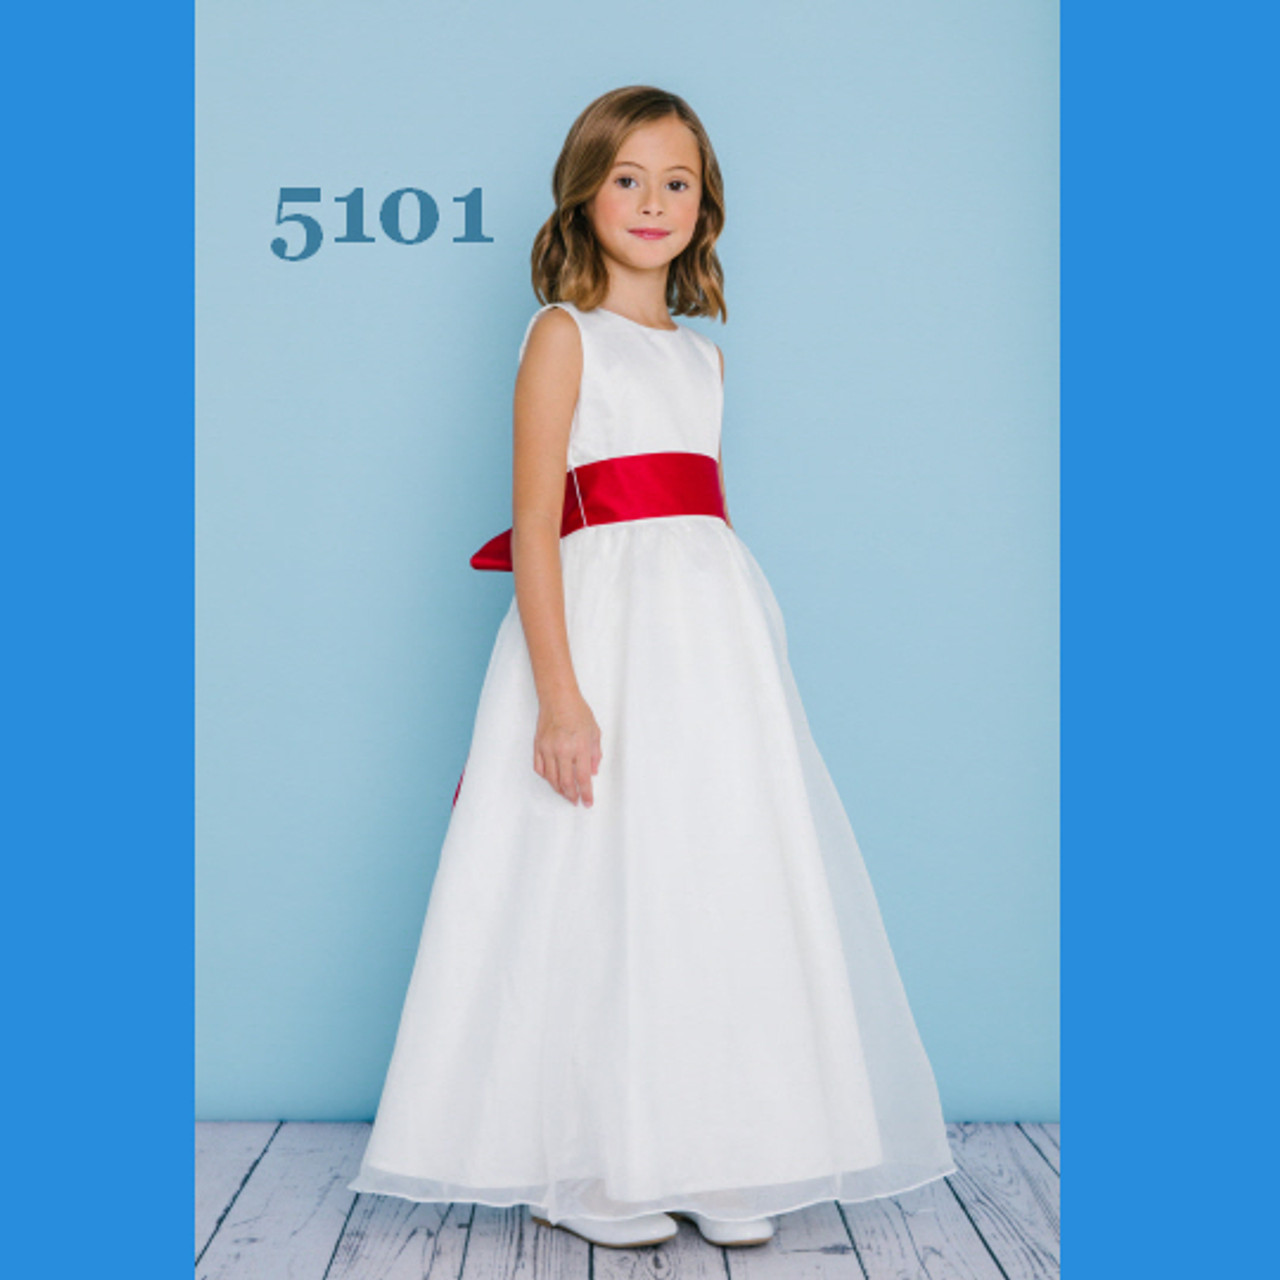 Rosebud Fashions Flower Girl Dresses  Style 5101 -Satin and Organza